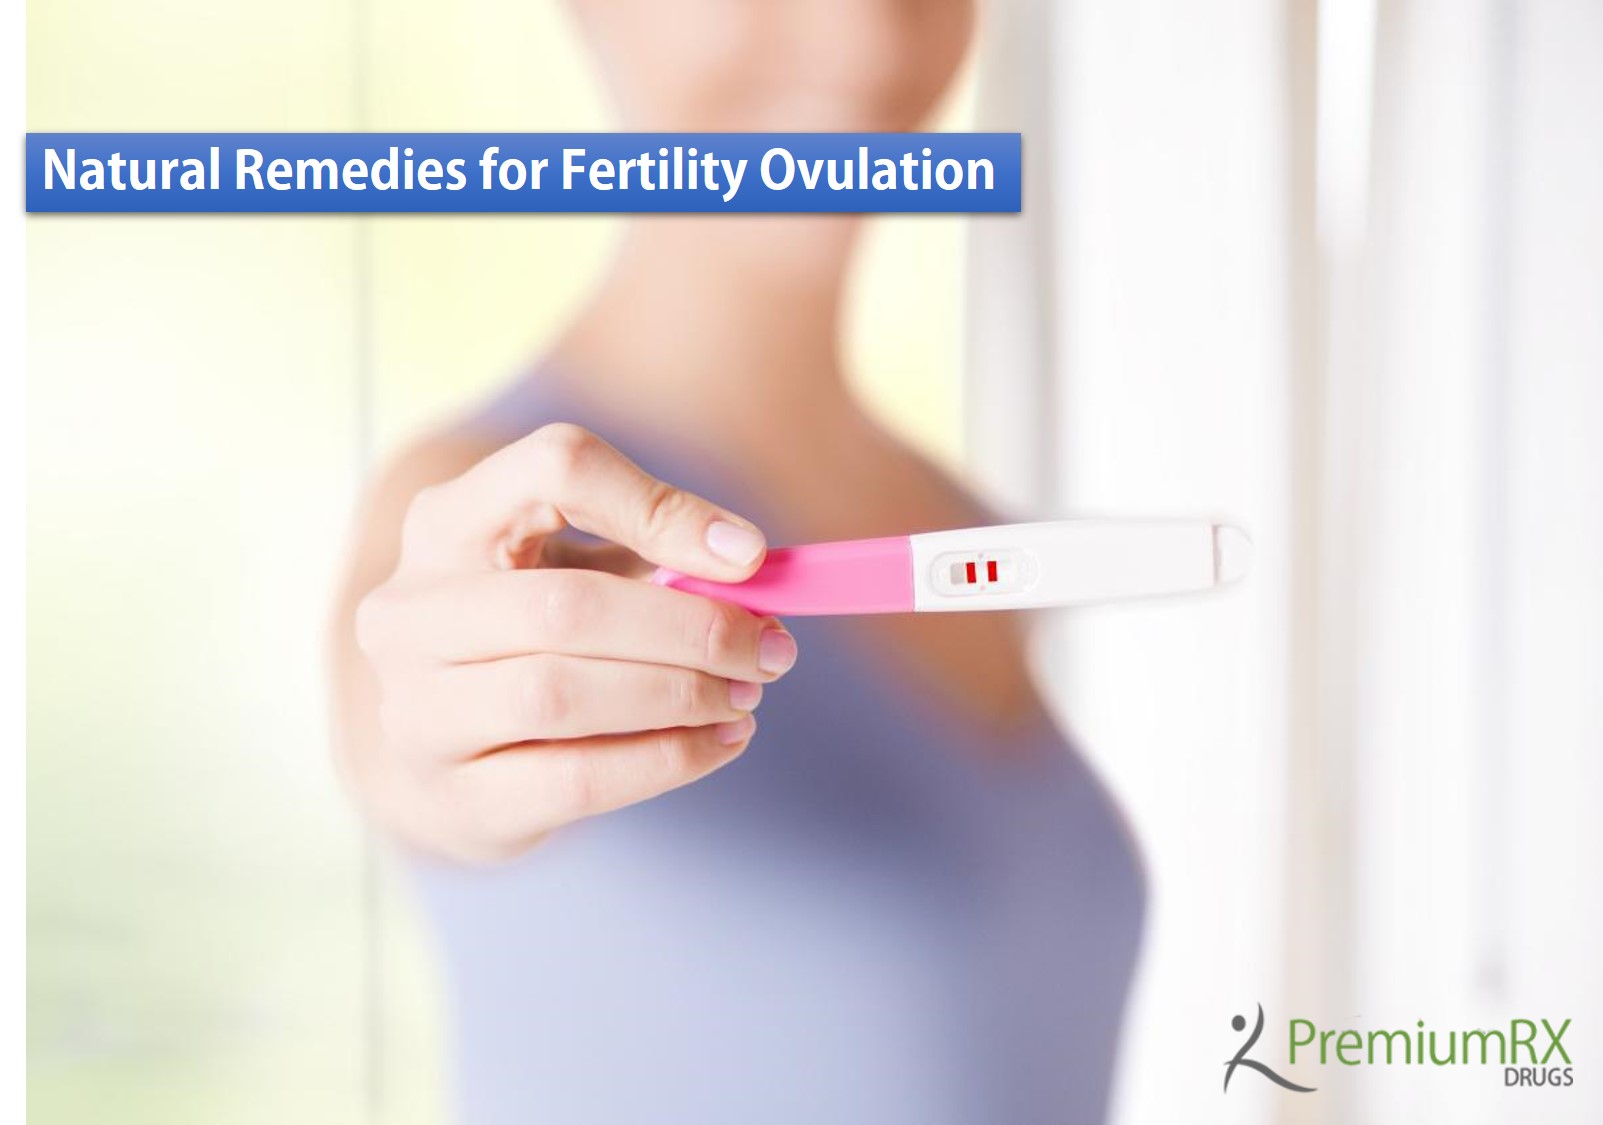 Natural Remedies for Fertility Ovulation